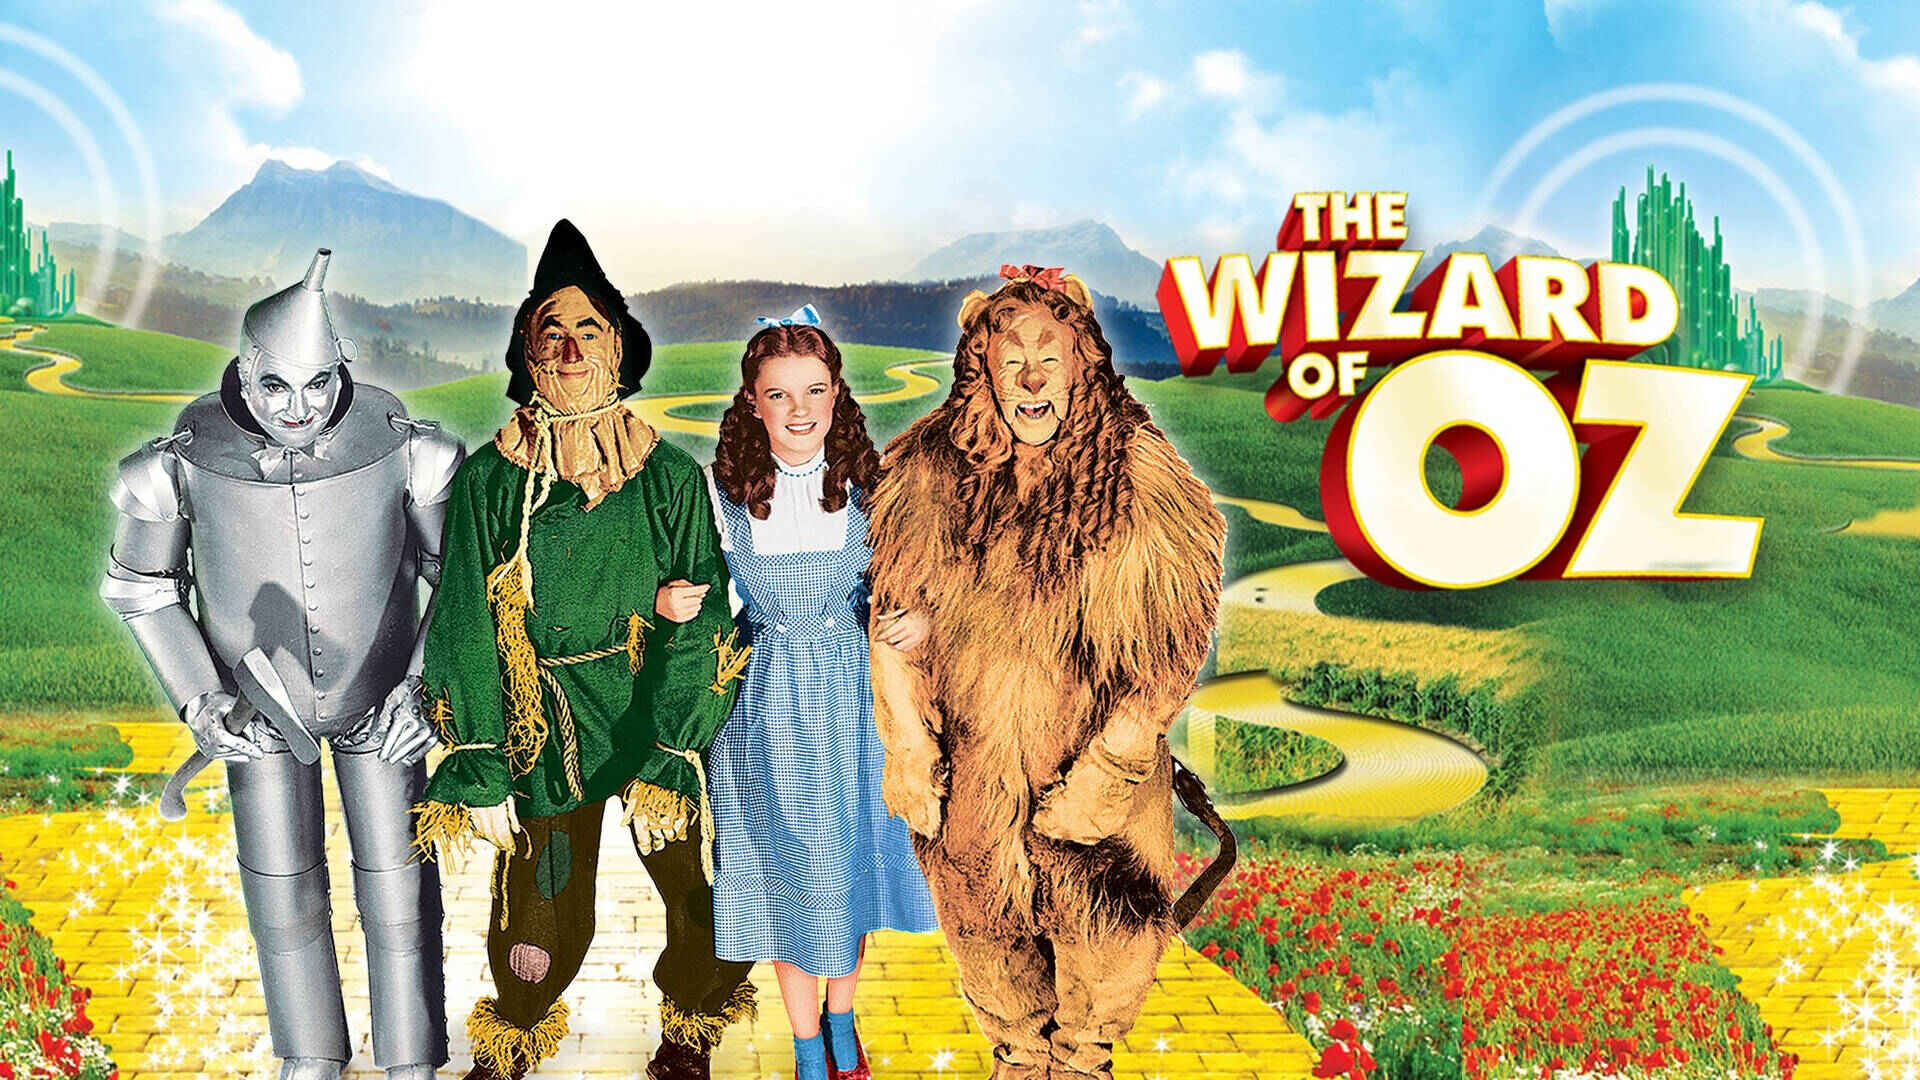 37 Facts about the movie The Wizard of Oz - Facts.net